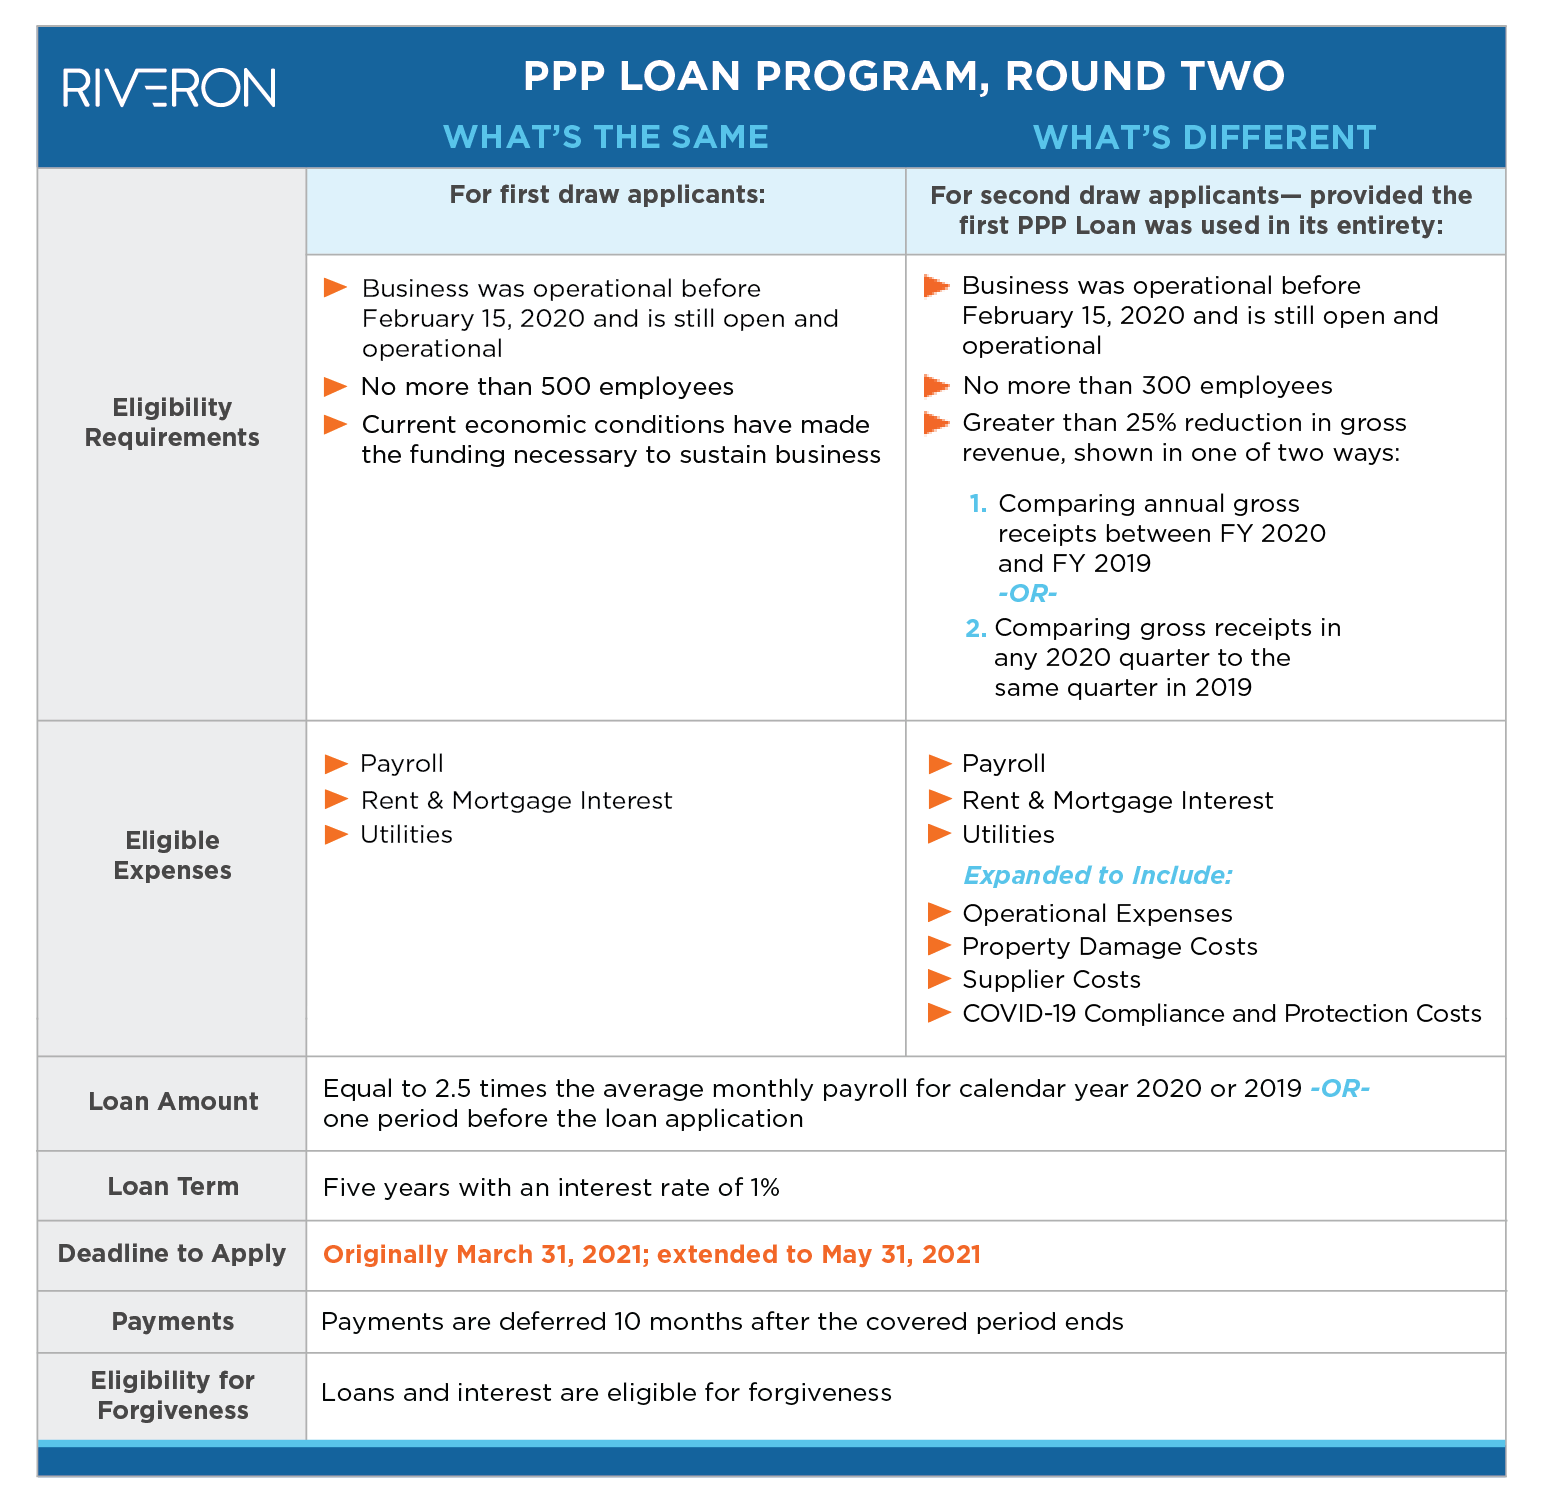 The Latest Round of PPP Loans: Accounting and M&A Considerations